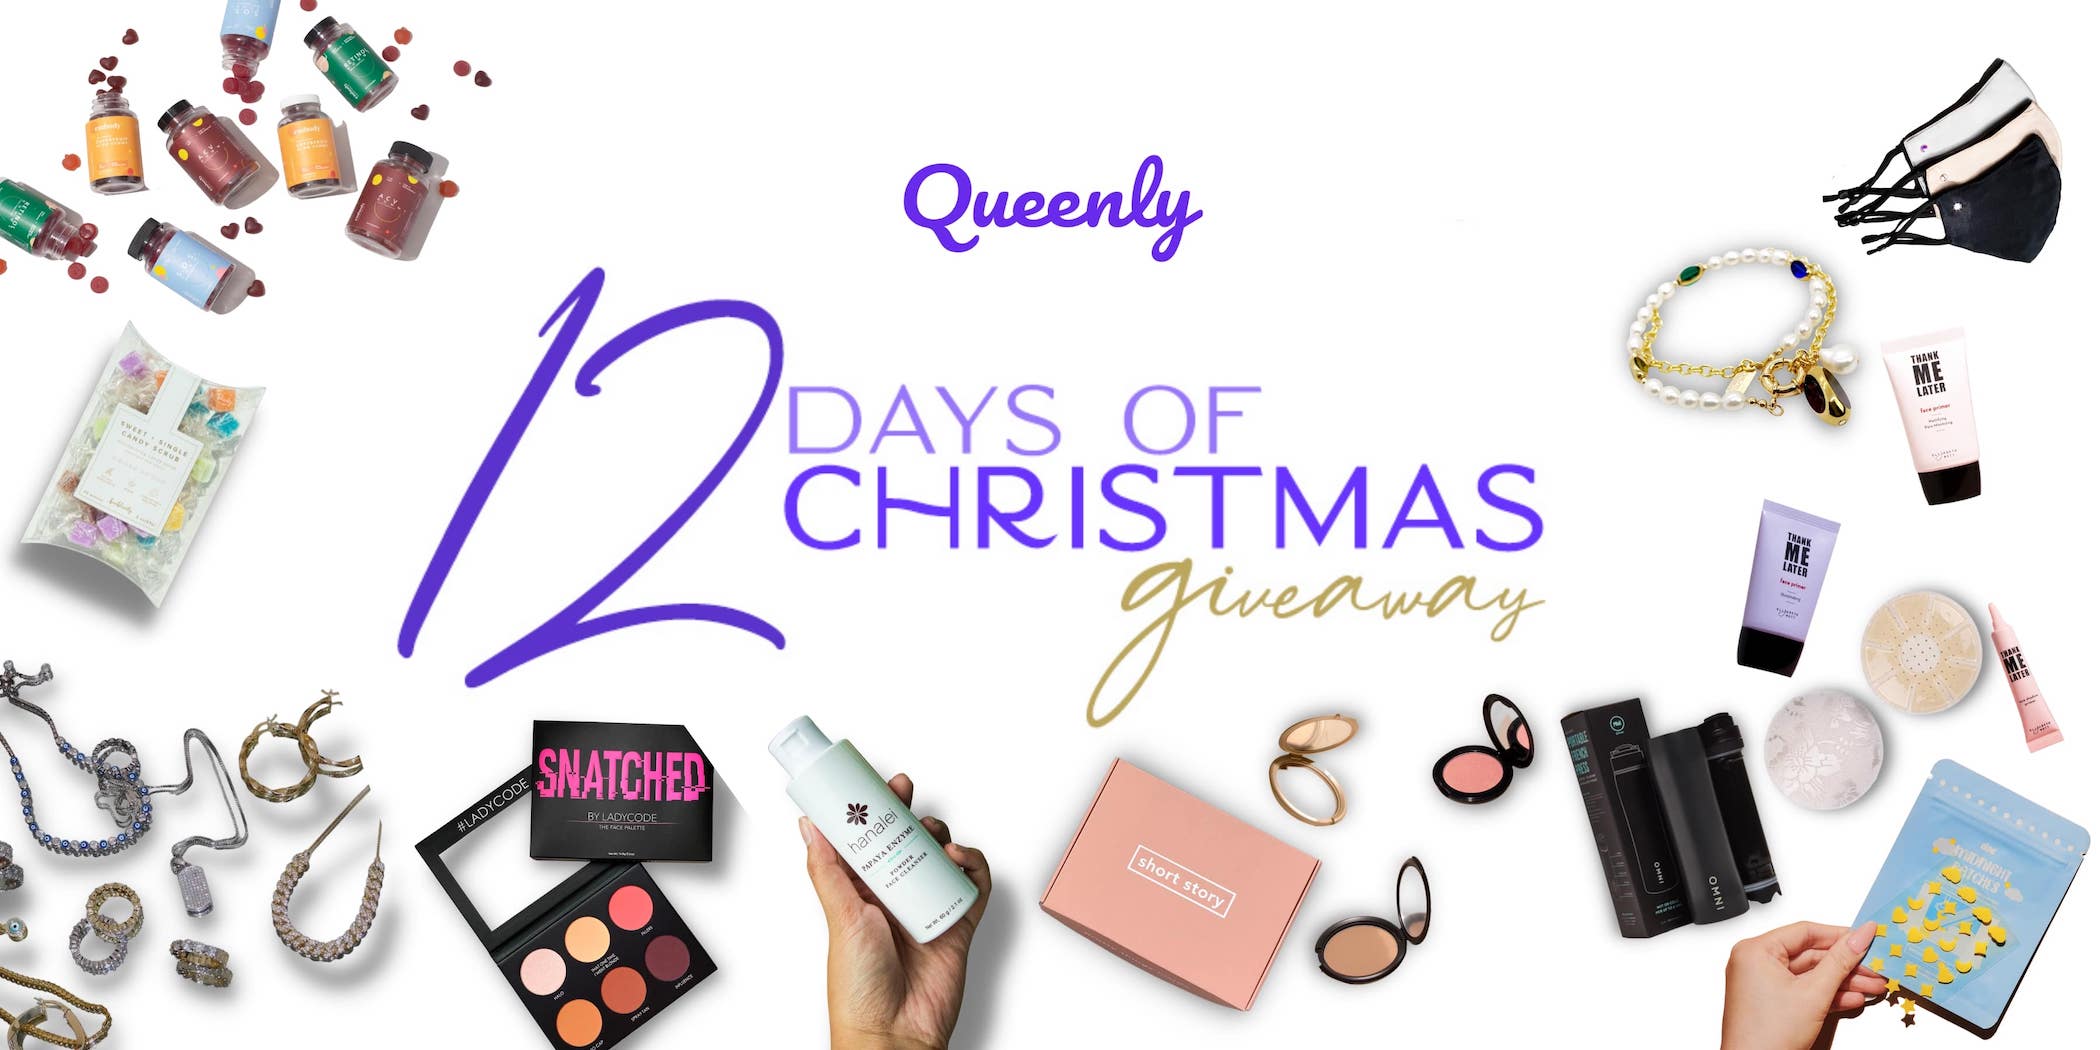 Queenly’s 12 Days of Christmas Giveaway